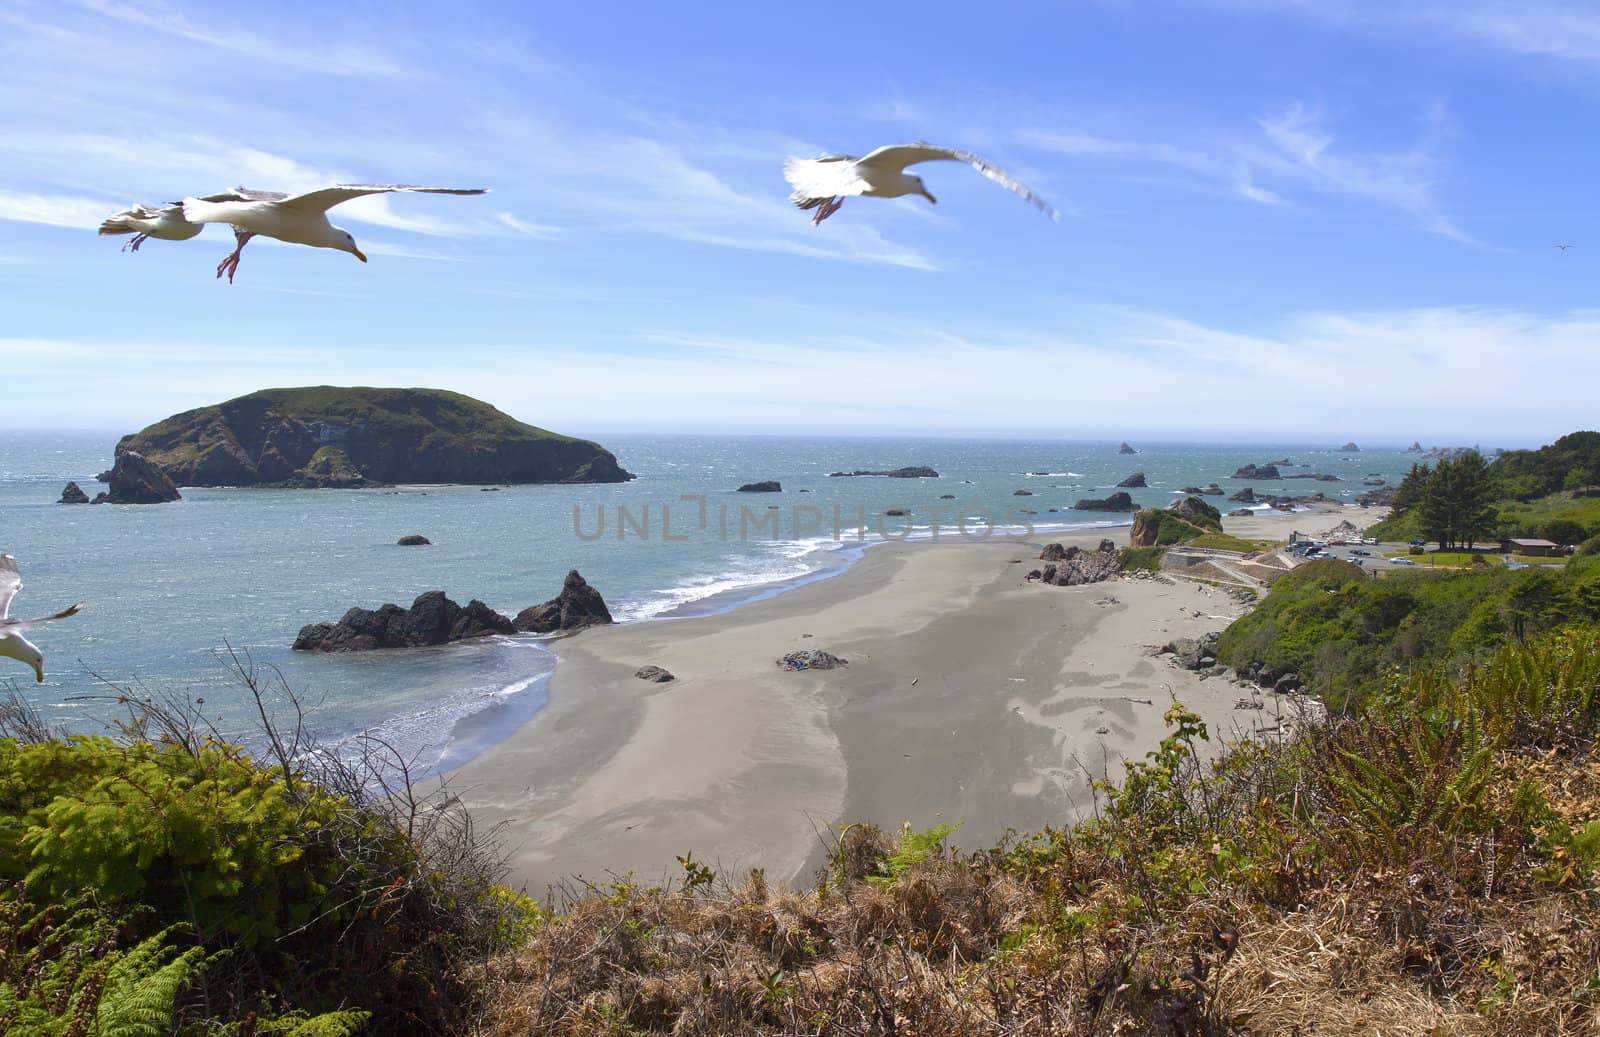 Oregon coast and beaches and seagulls. by Rigucci